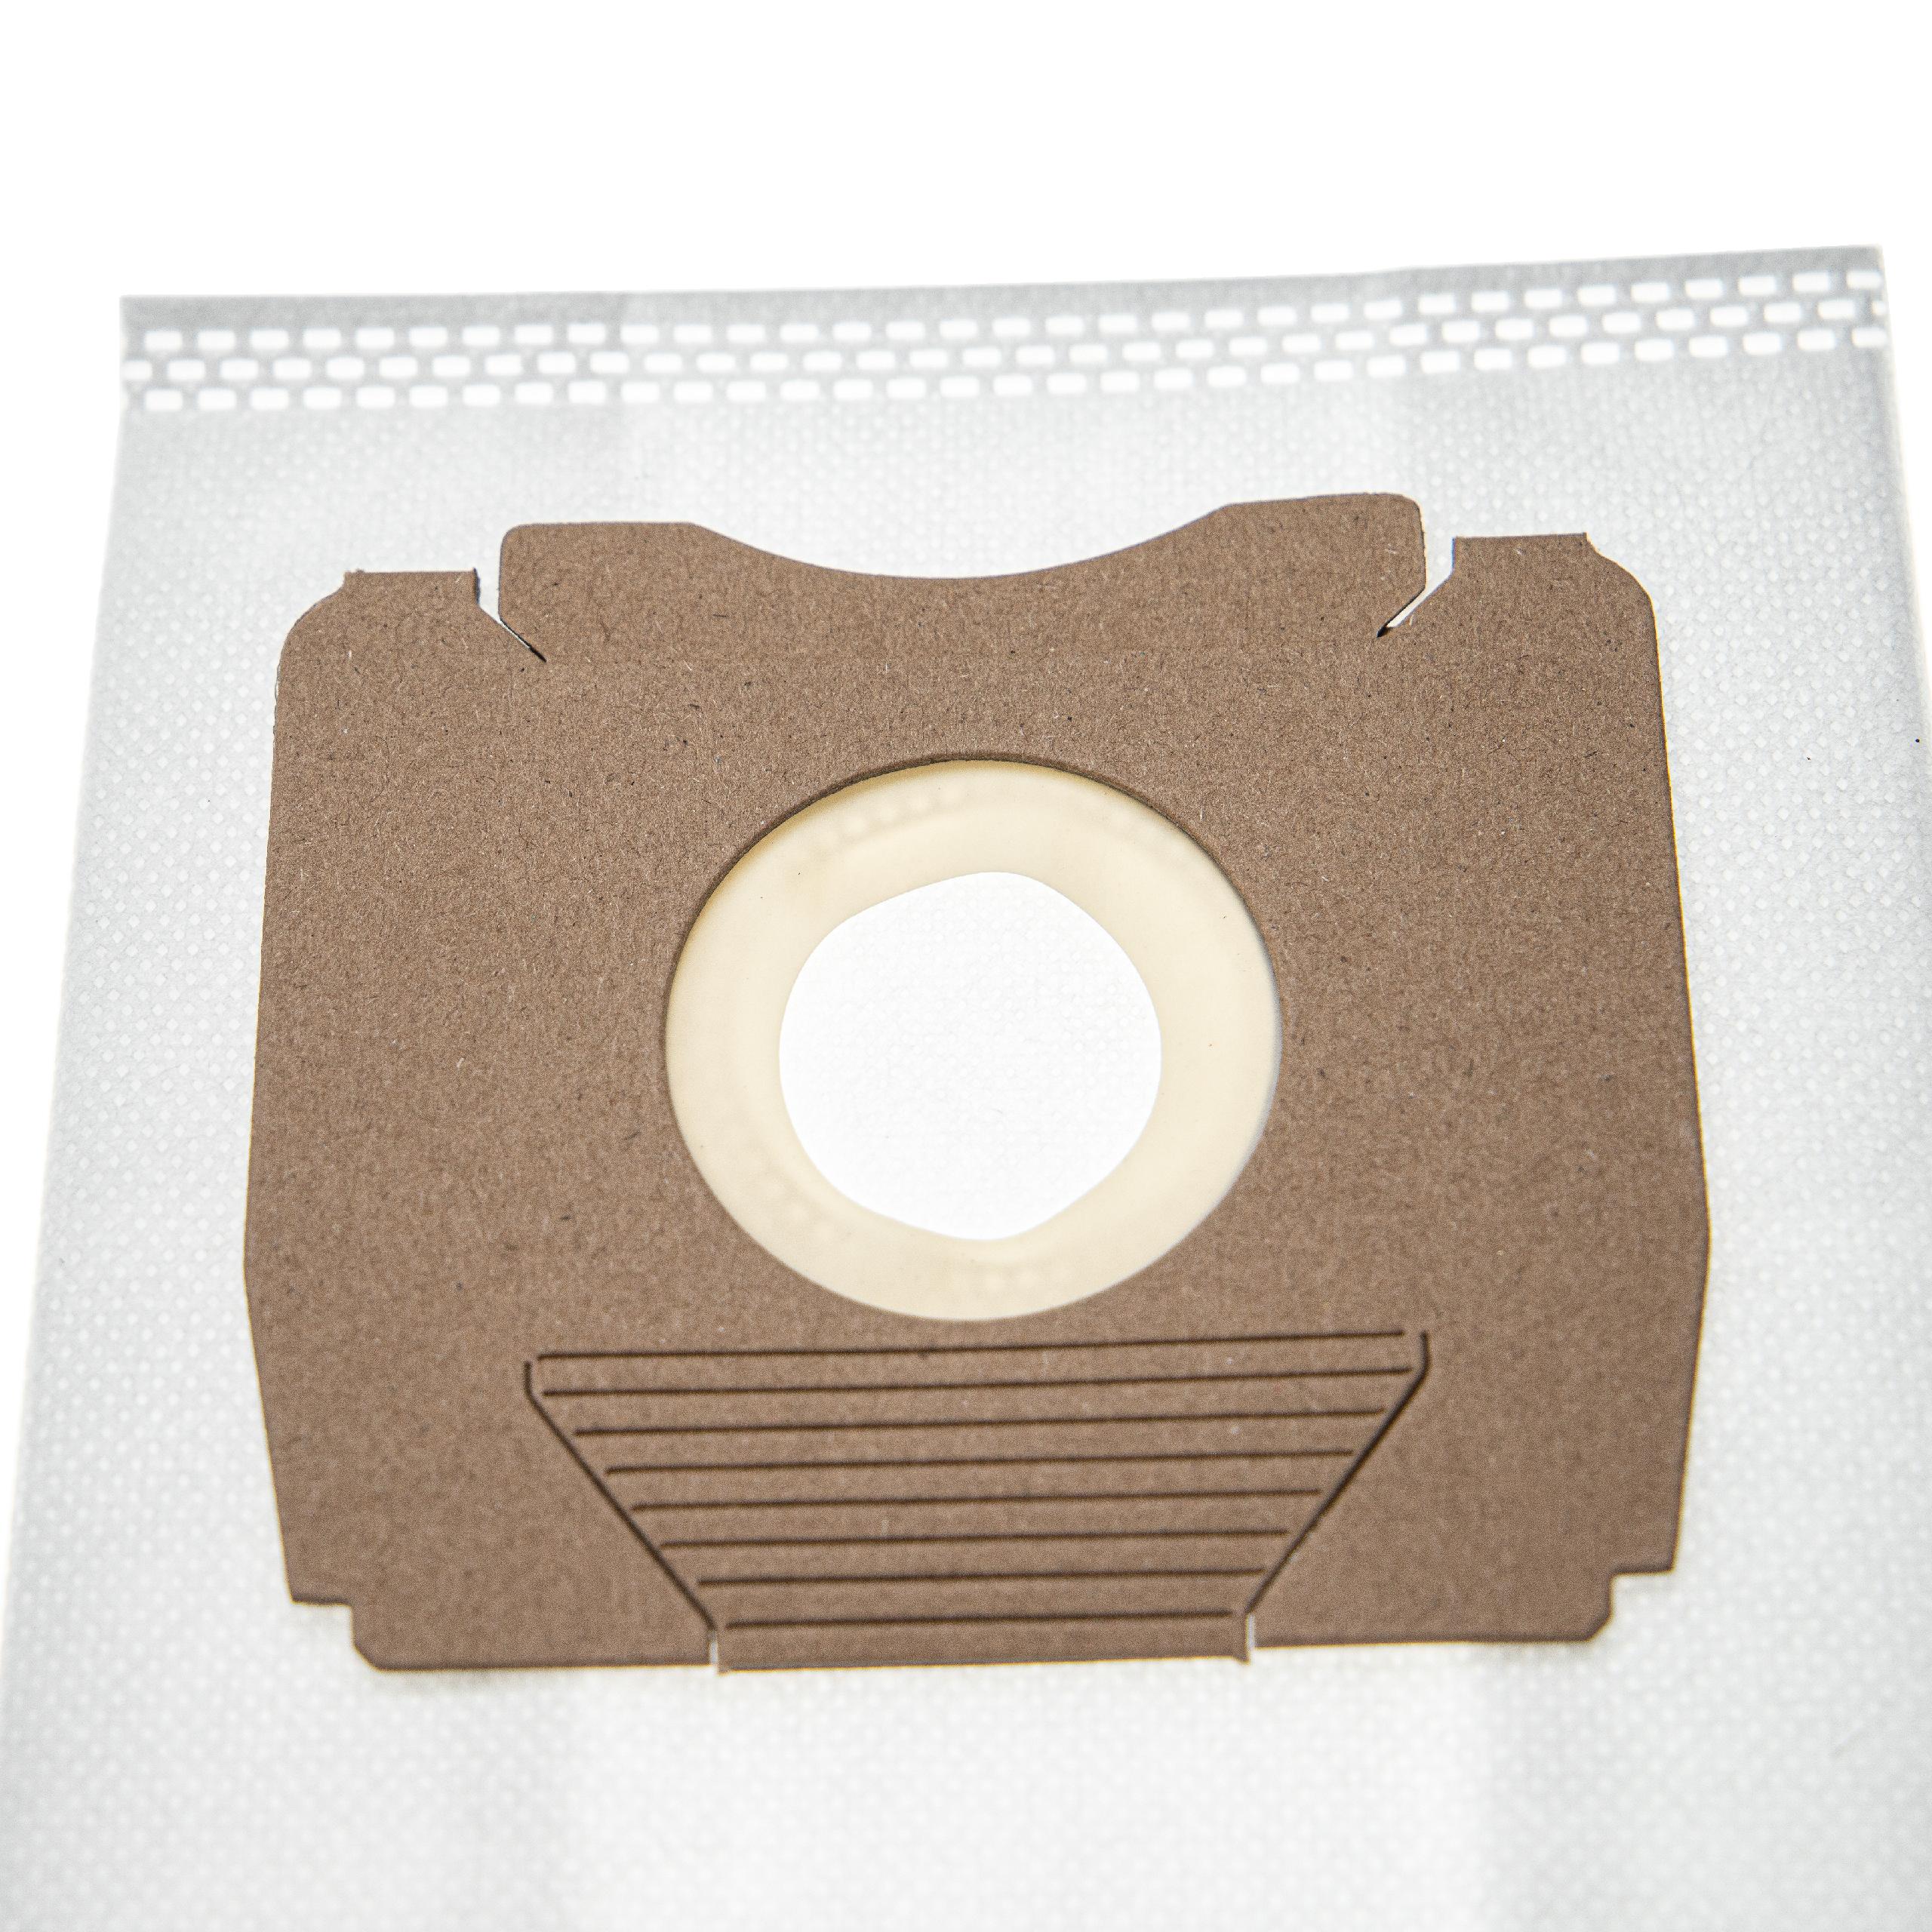 10x Vacuum Cleaner Bag replaces AEG size 5, 9002565407, size 5S for Satrap - microfleece